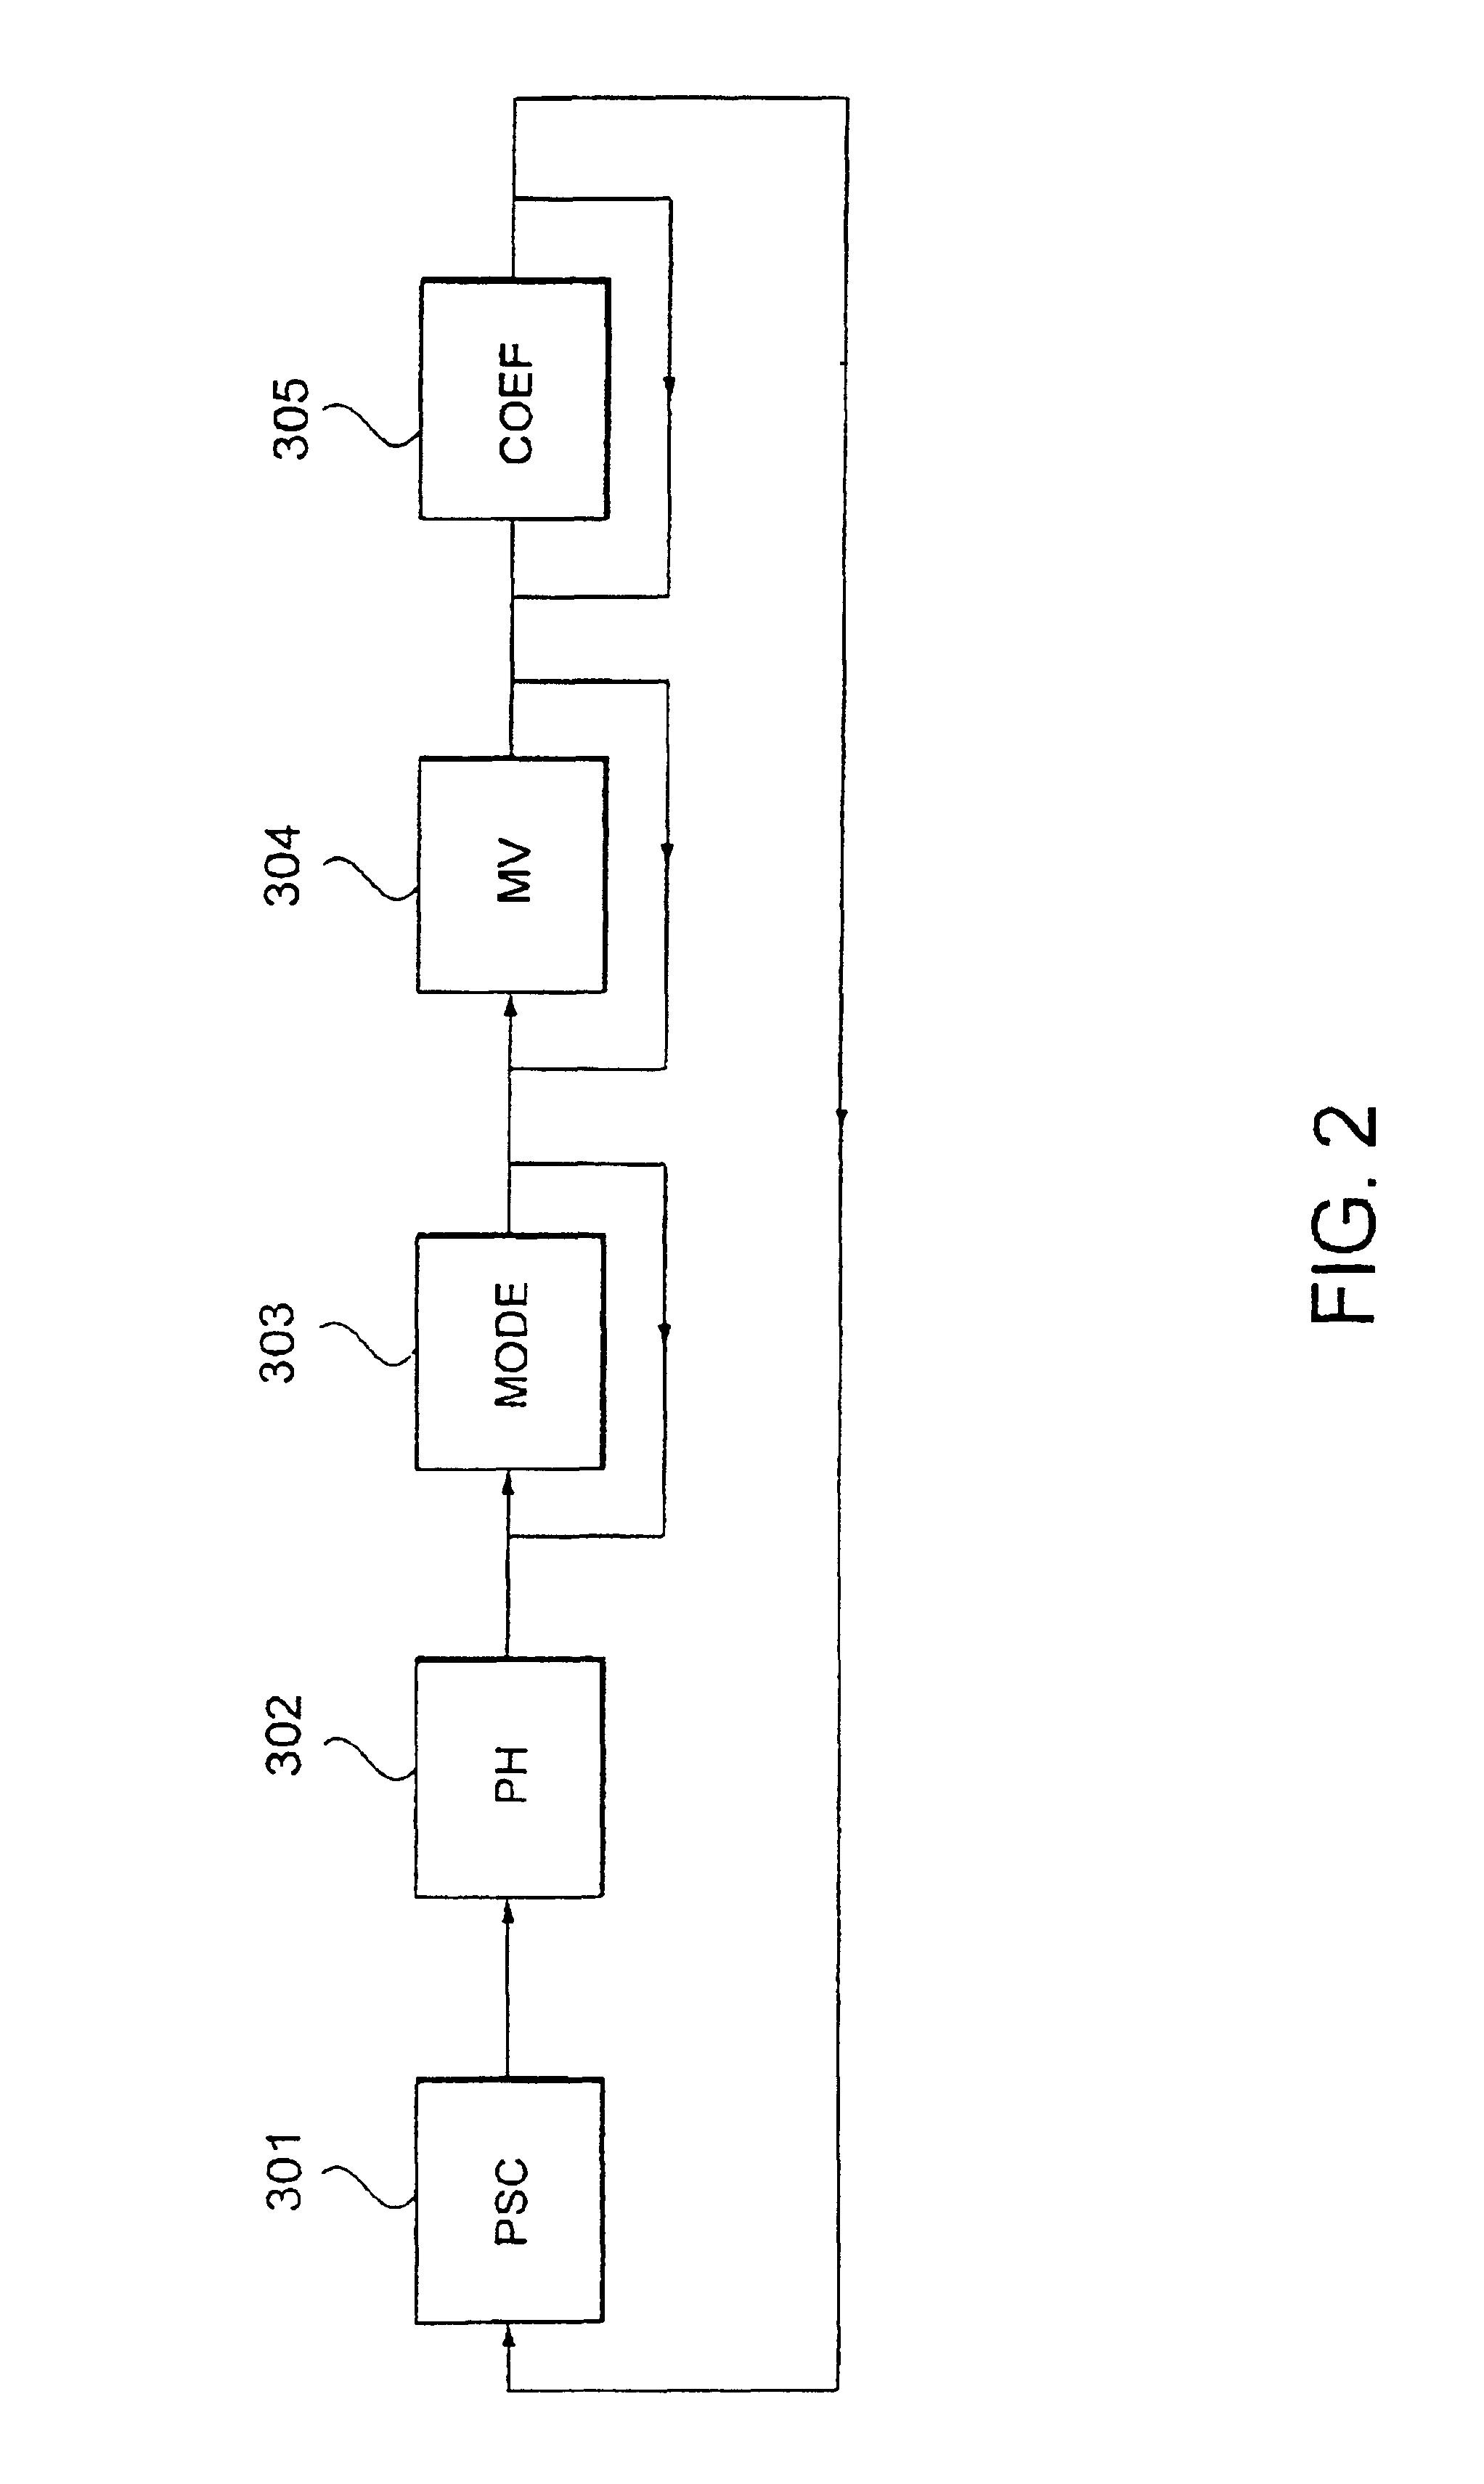 Coding system and decoding system